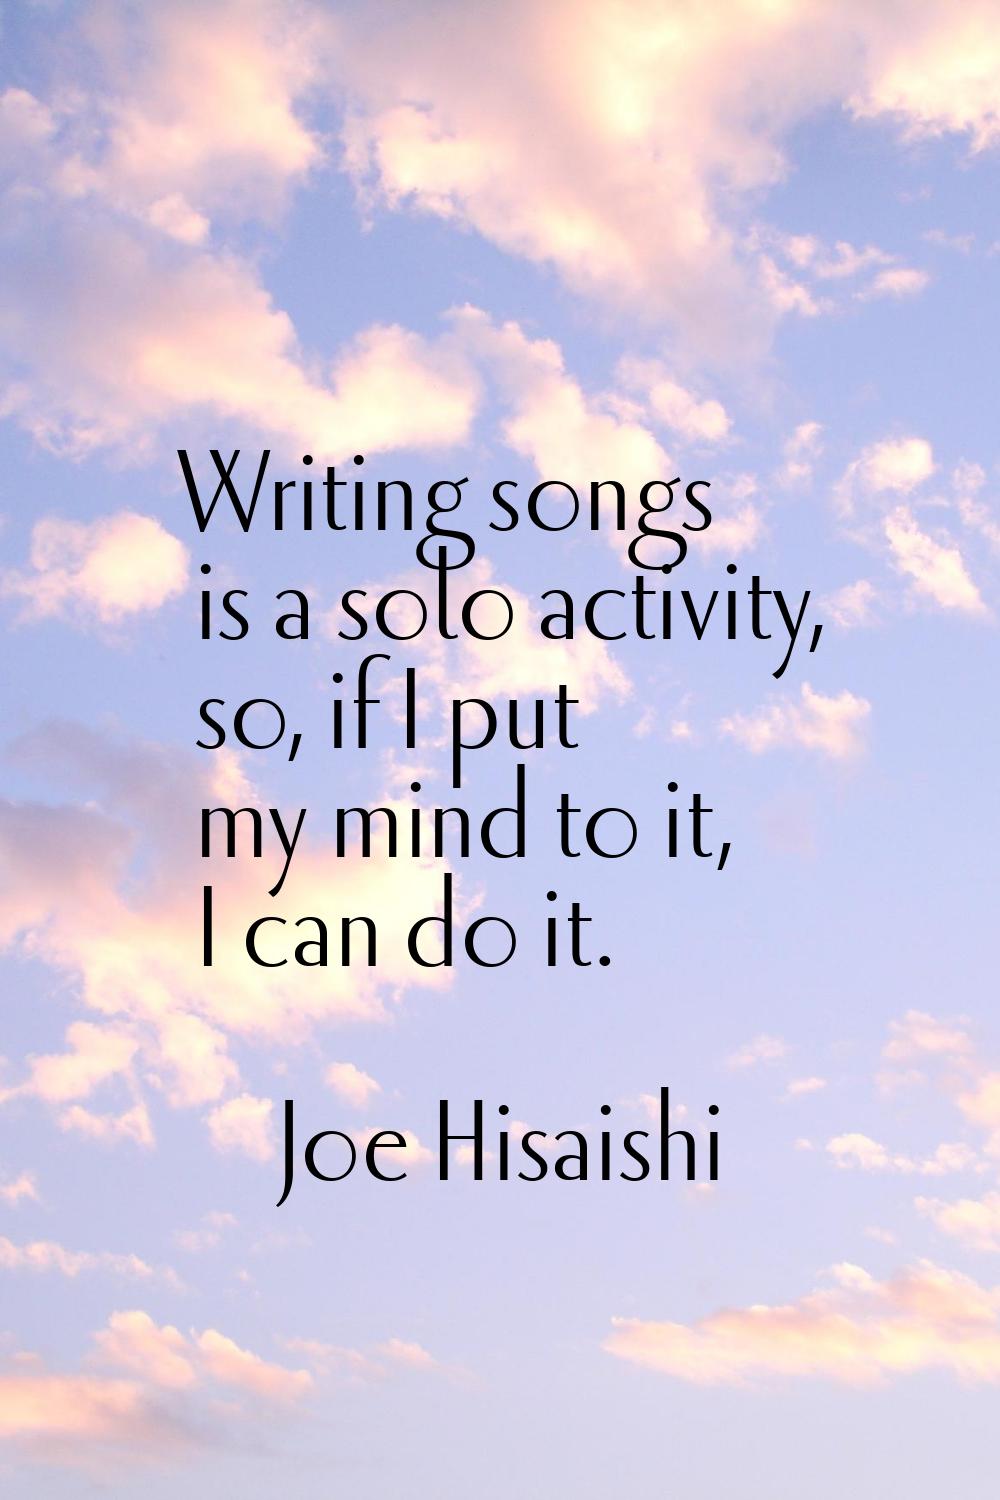 Writing songs is a solo activity, so, if I put my mind to it, I can do it.